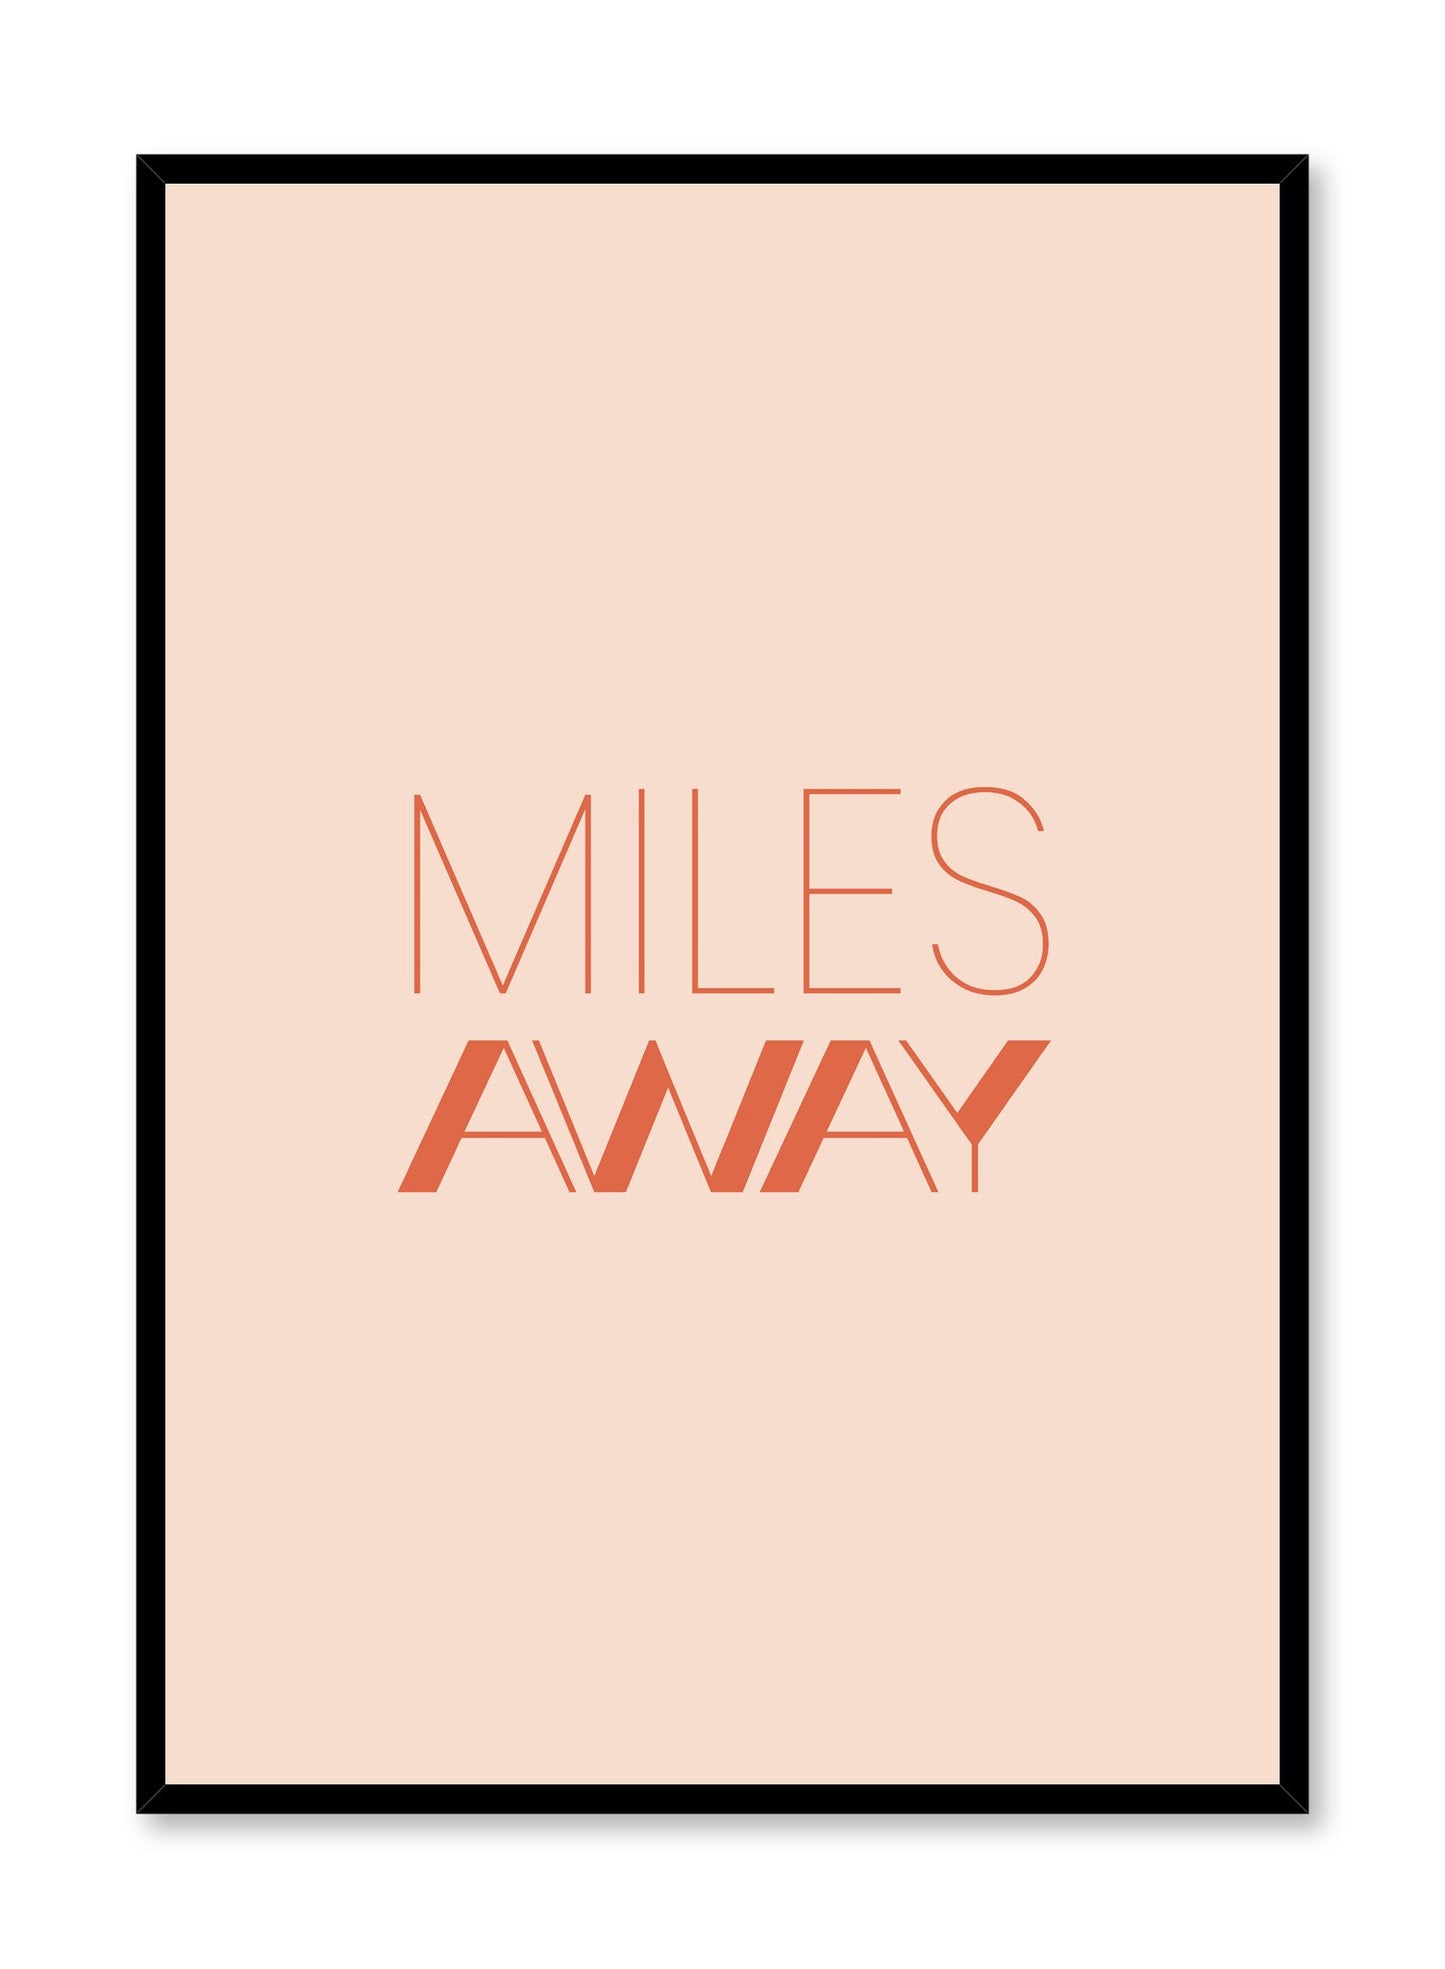 Modern minimalist typography poster by Opposite Wall with Miles Away quote in orange.